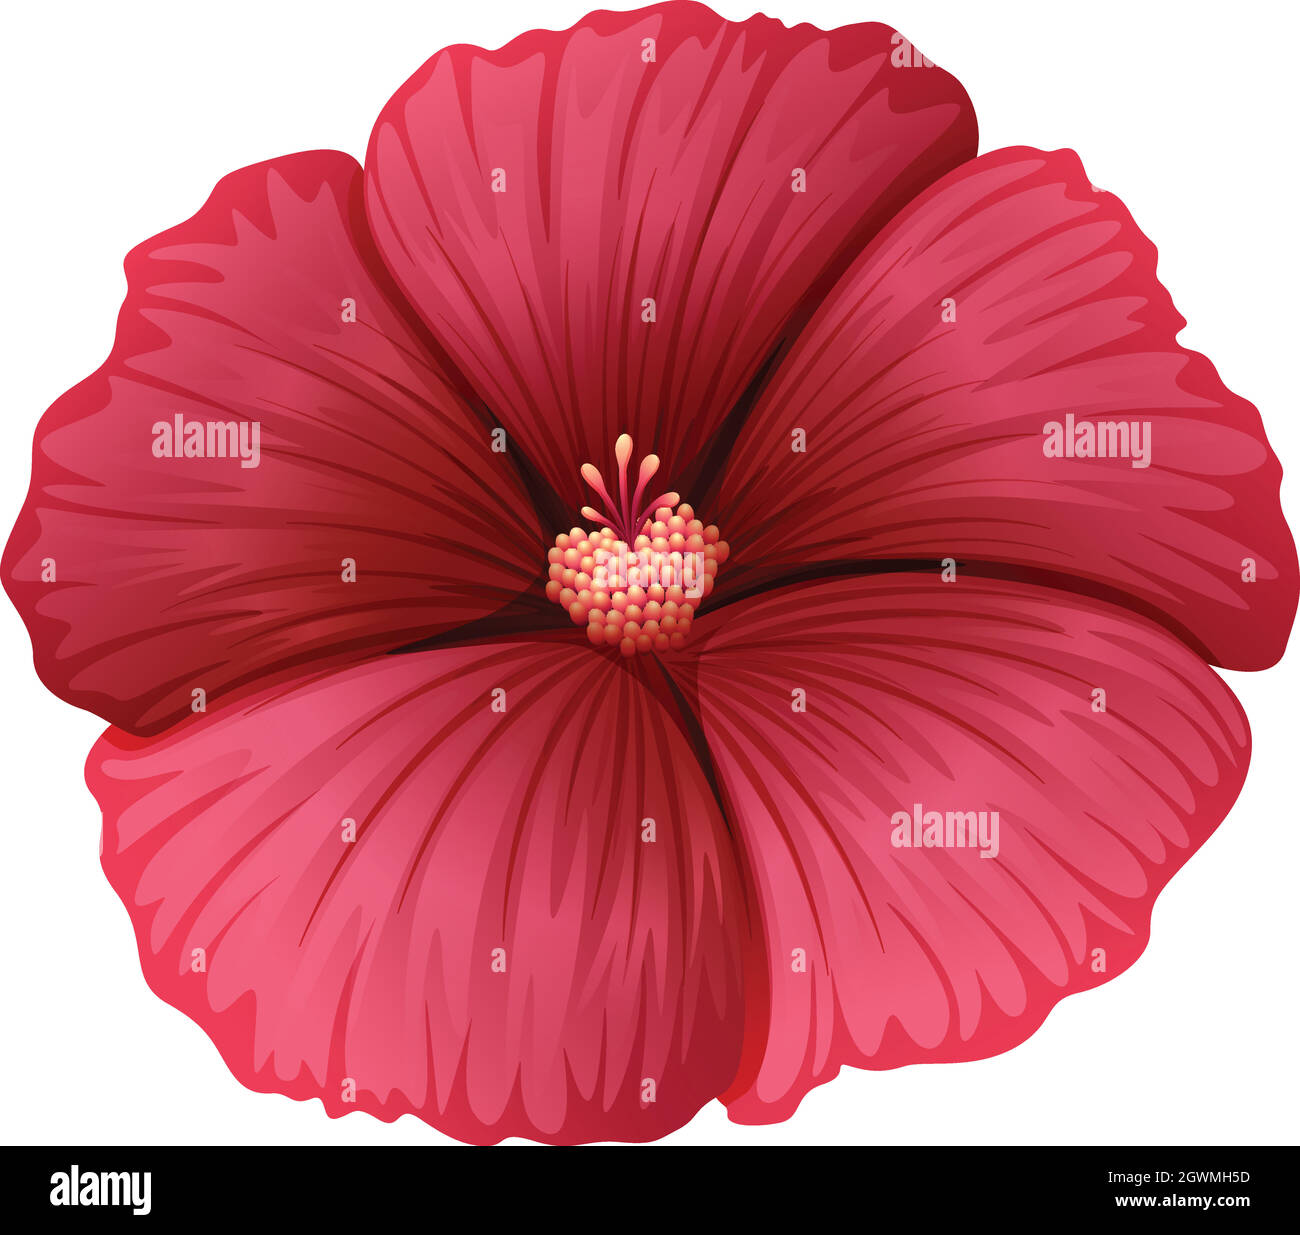 A red flower Stock Vector